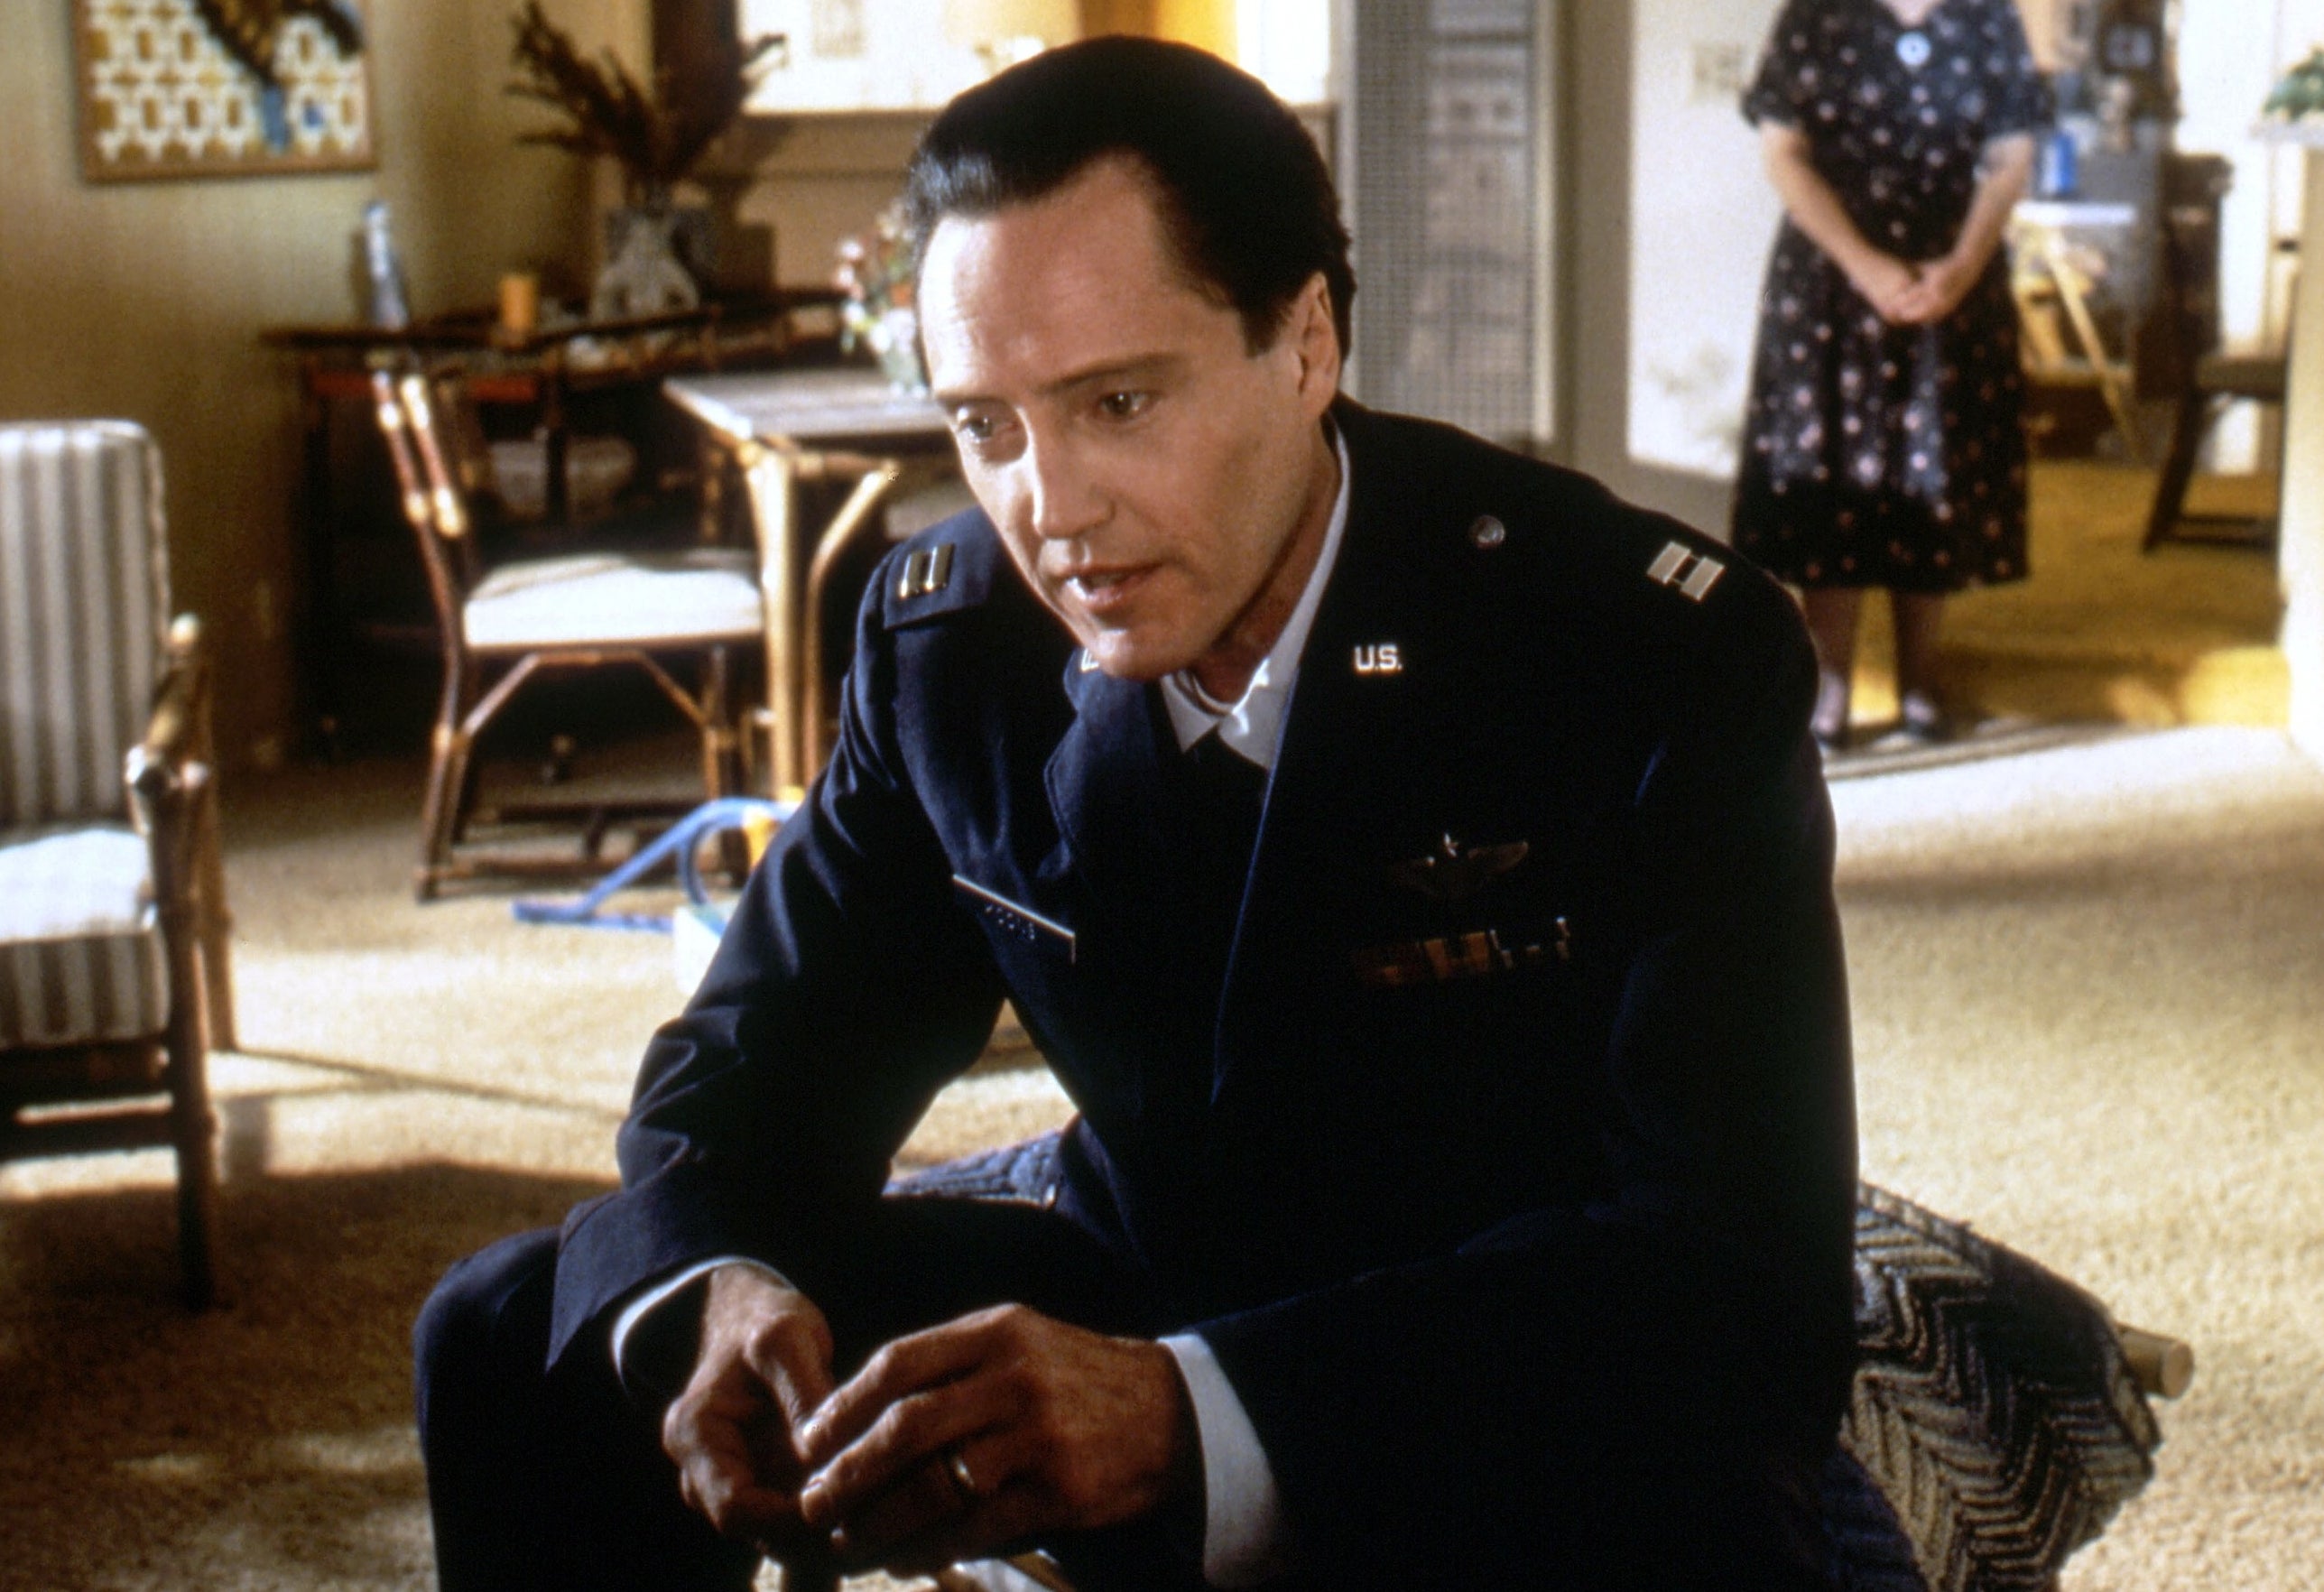 Walken in a military suit, holding a watch talking to a kid